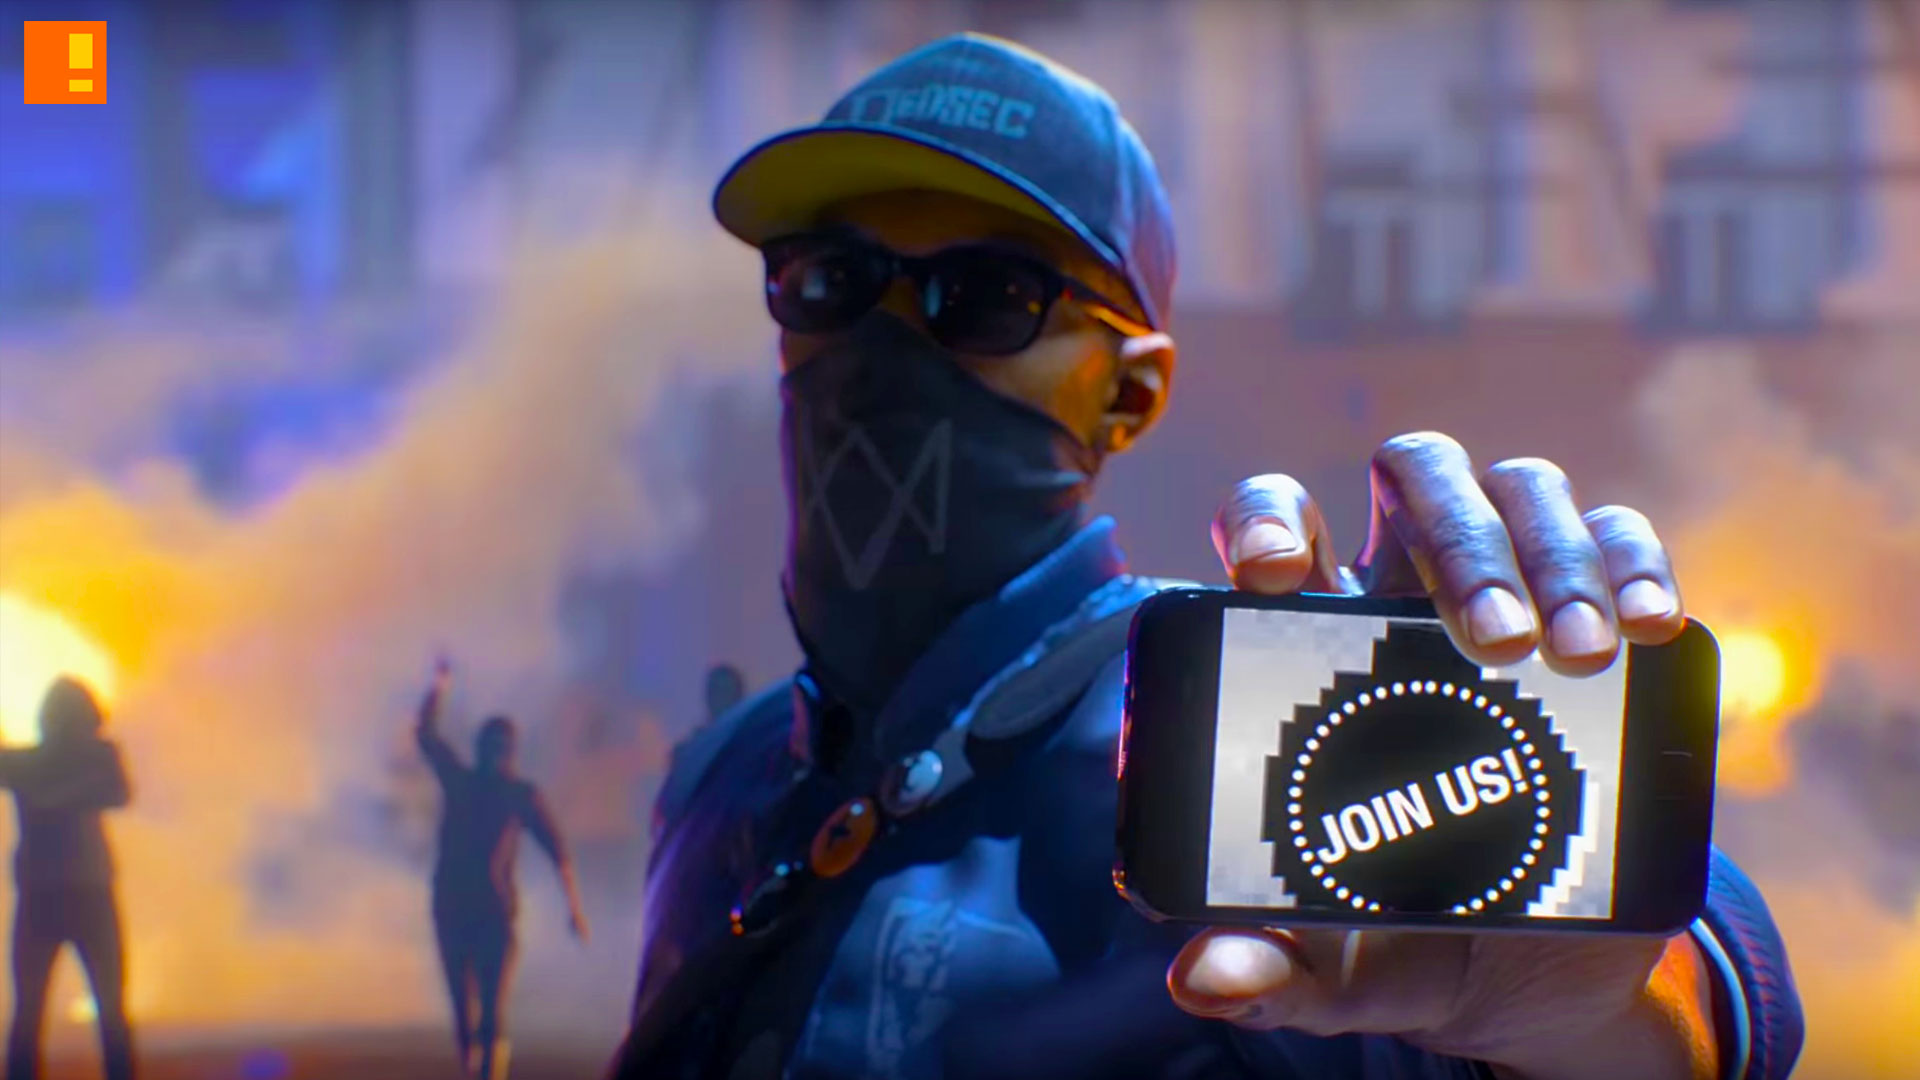 watch dogs 2, trailer, ubisoft, the action pixel, entertainment on tap, the action pixel